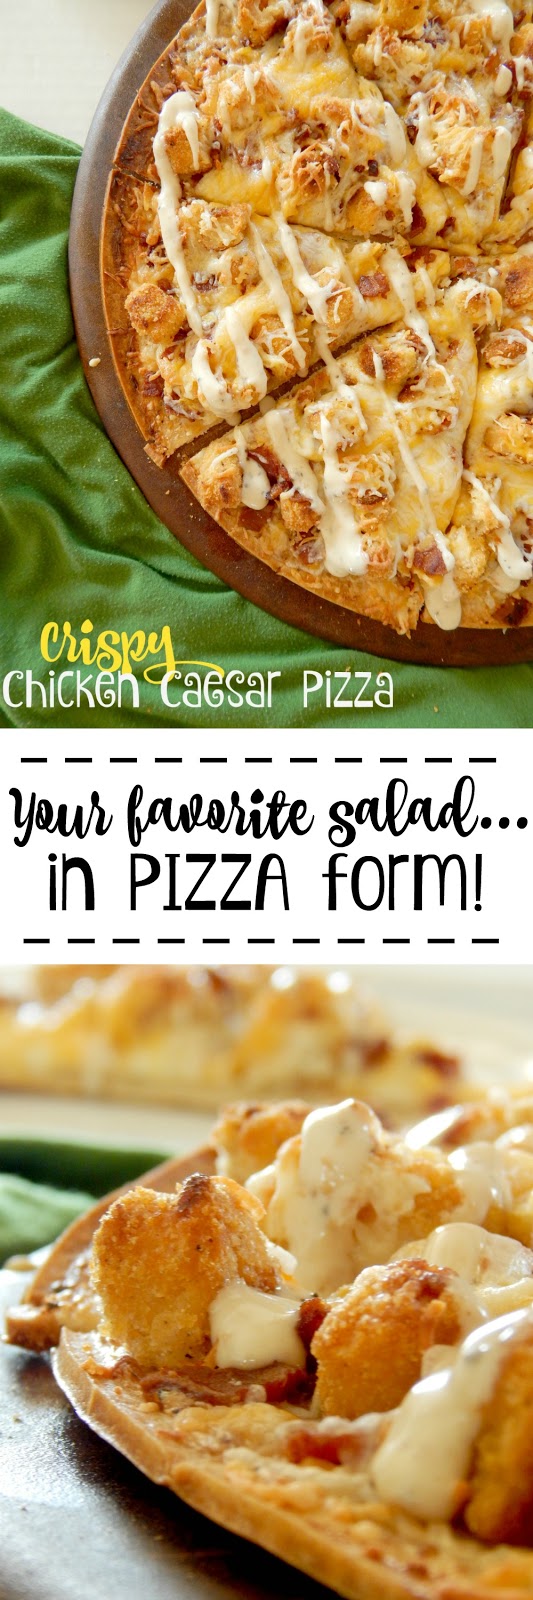 Crispy Chicken Caesar Pizza...the tastes of a great Caesar salad on pizza!  A crispy thin crust, Caesar dressing, bacon and chicken.  Delicious! (sweetandsavoryfood.com)